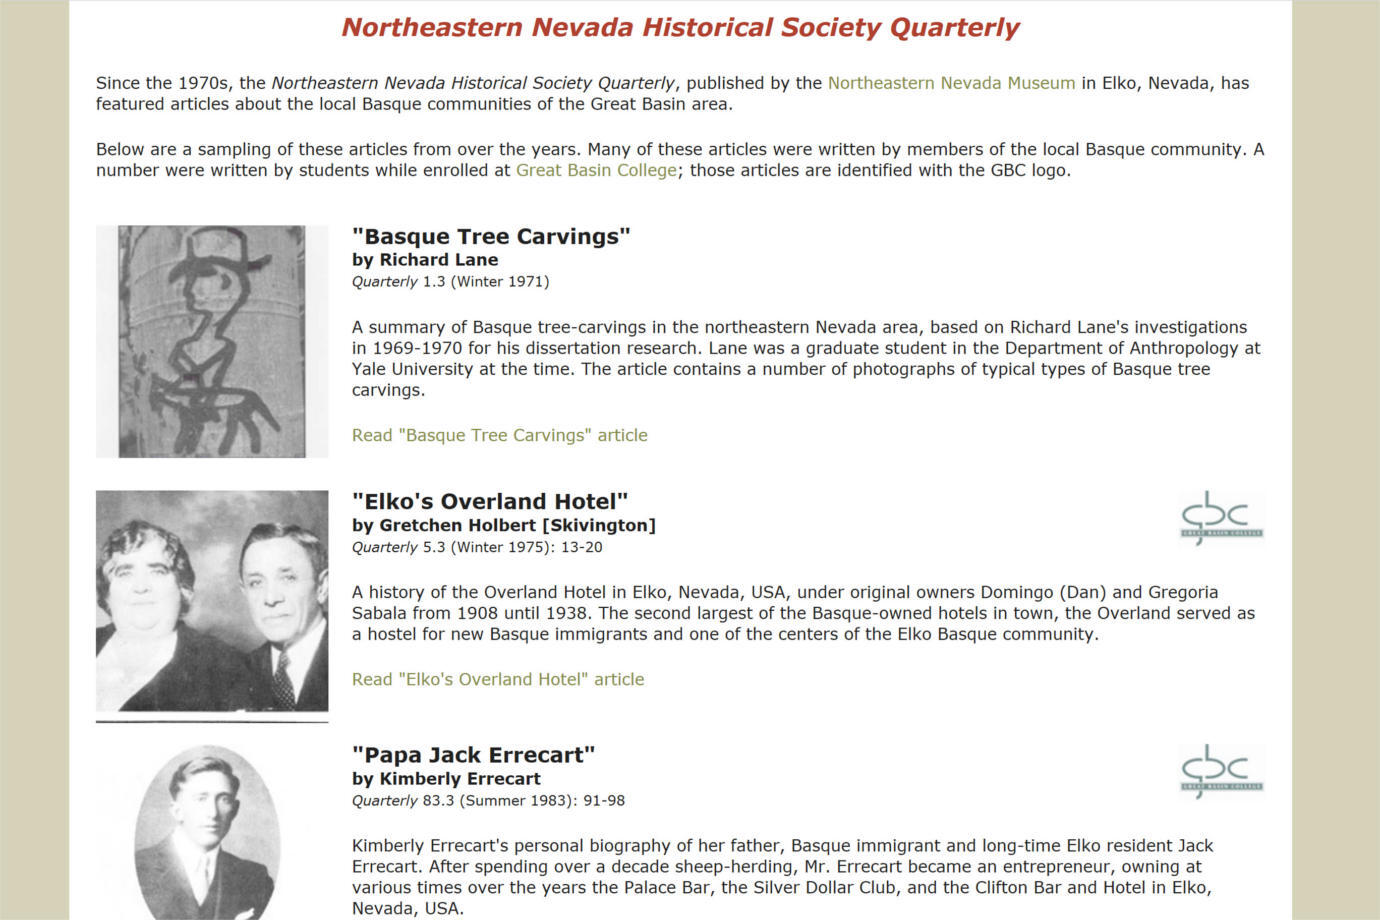 Archives of the *Northeastern Nevada Historical Society Quarterly*, which are hosted by Virtual Humanities Center. Image courtesy of Great Basin College.